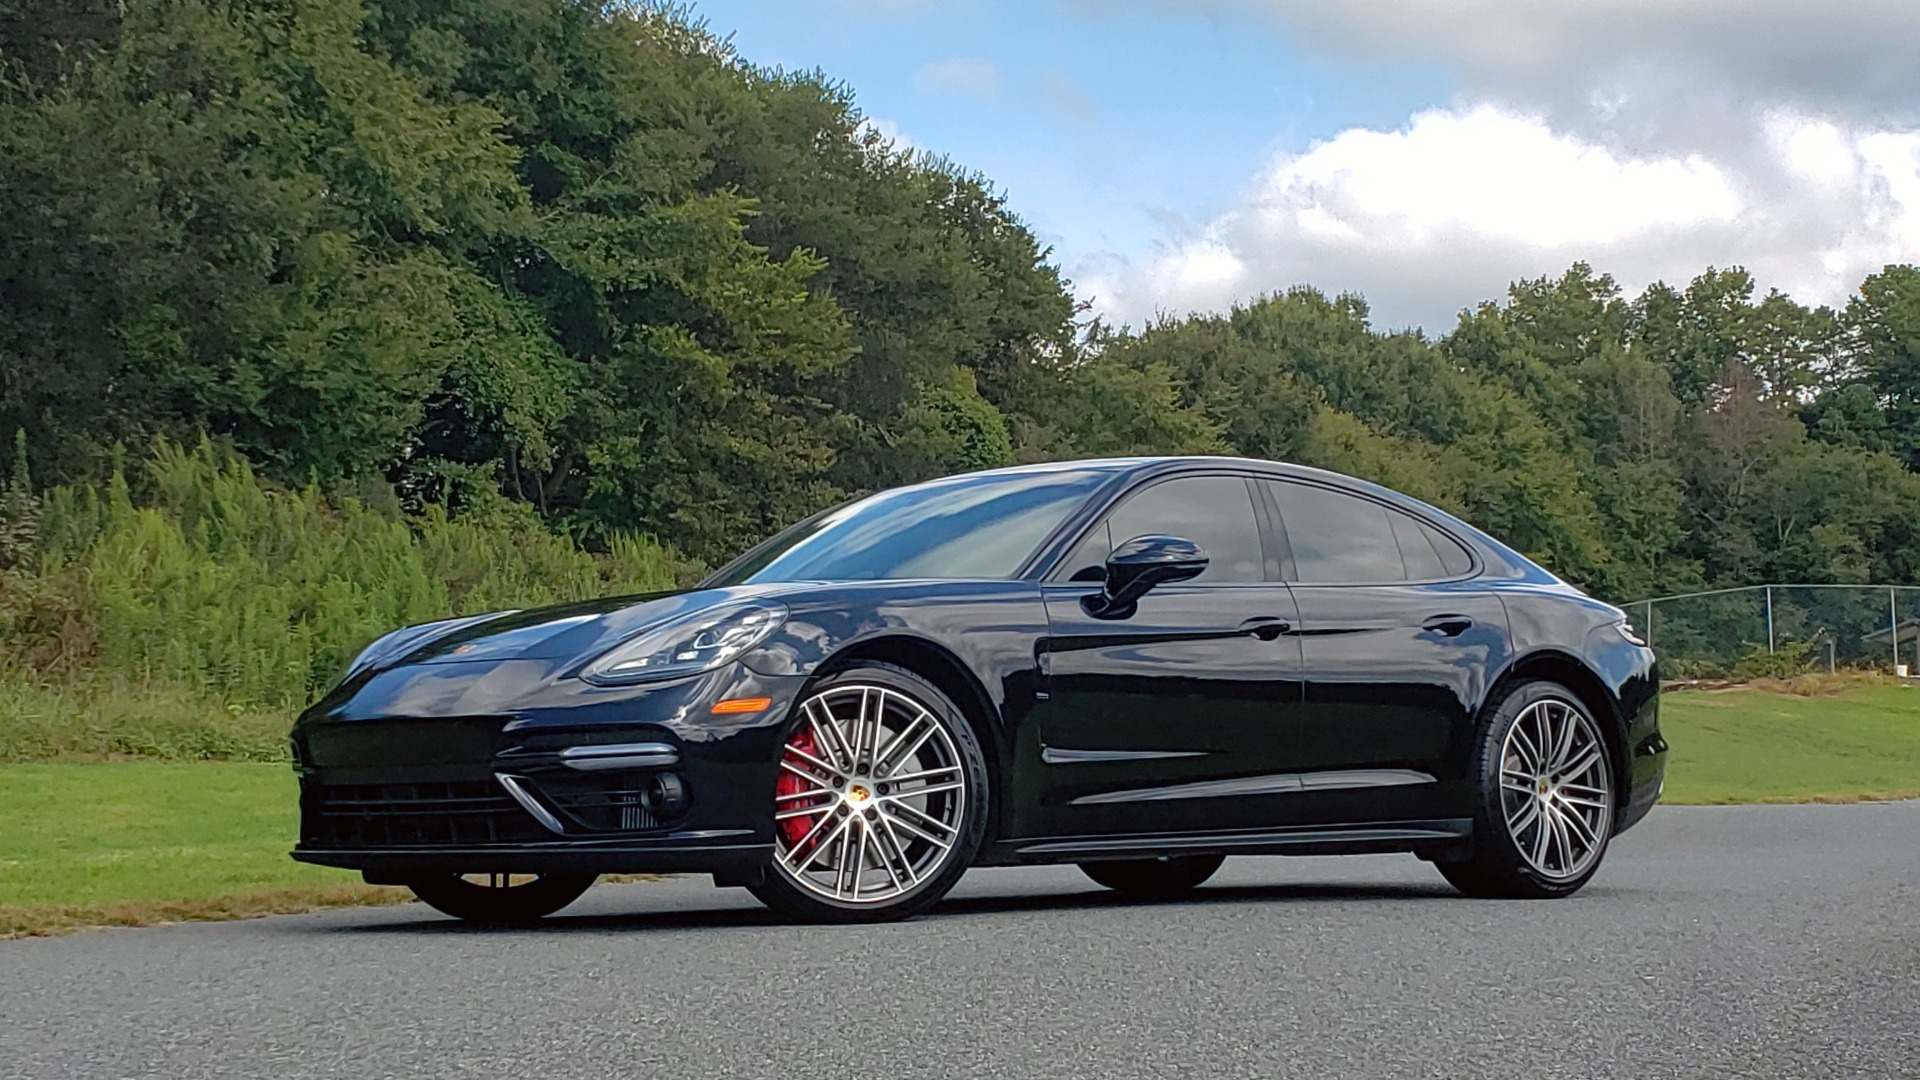 Used 2017 Porsche PANAMERA TURBO AWD / 4.0L V8 / AUTO / NAV / BOSE / REARVIEW / 21IN WHEELS for sale Sold at Formula Imports in Charlotte NC 28227 2